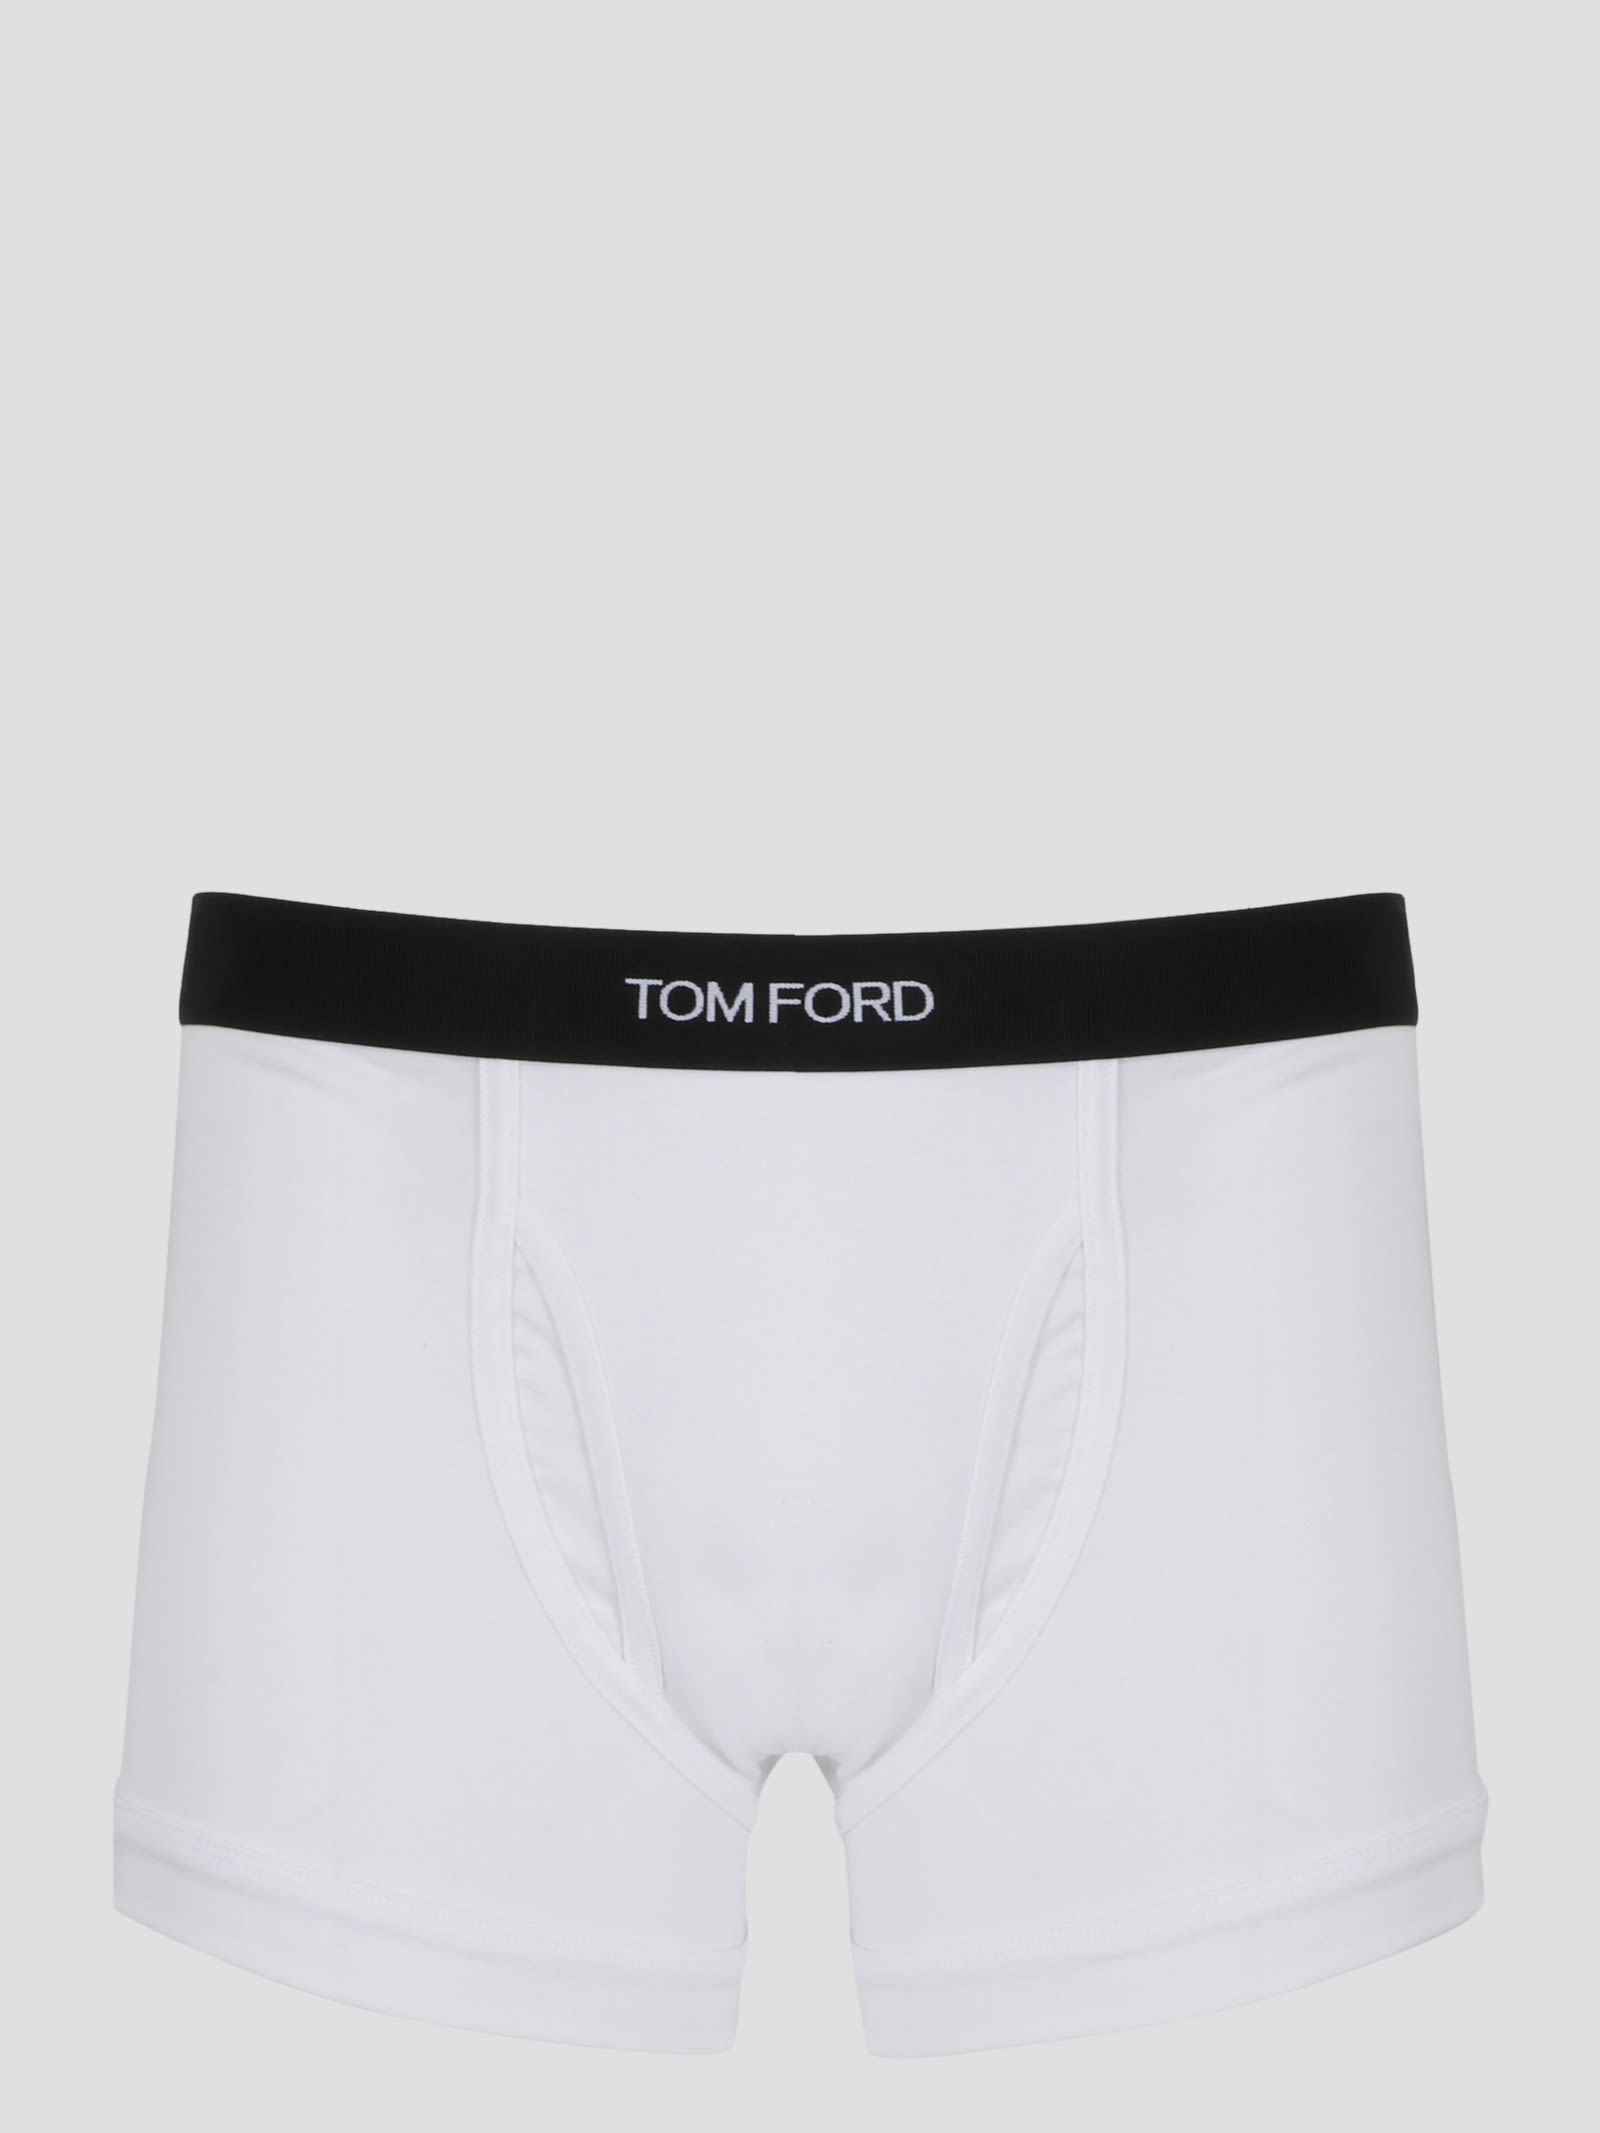 Tom Ford Intimo